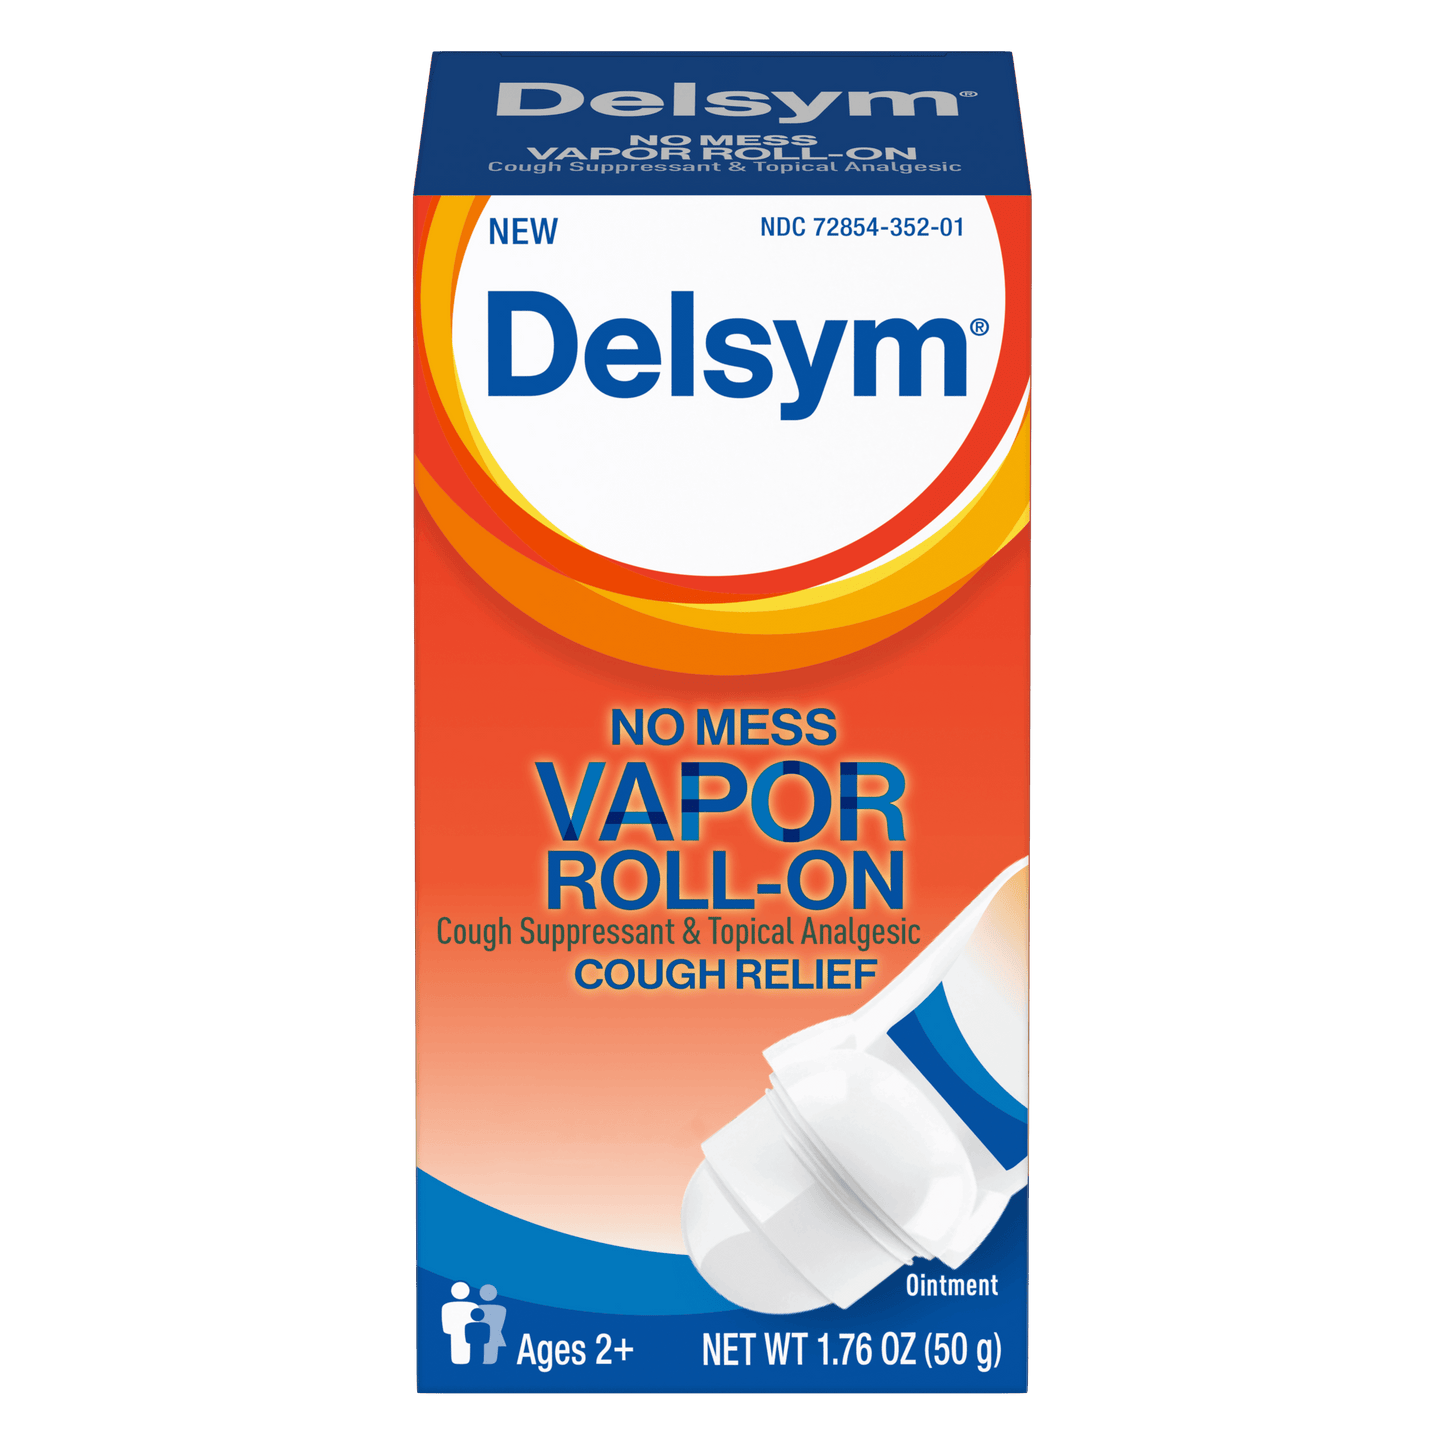 The front and top of the Delsym® No Mess Vapor Roll-On Topical Cough Relief package for adults.